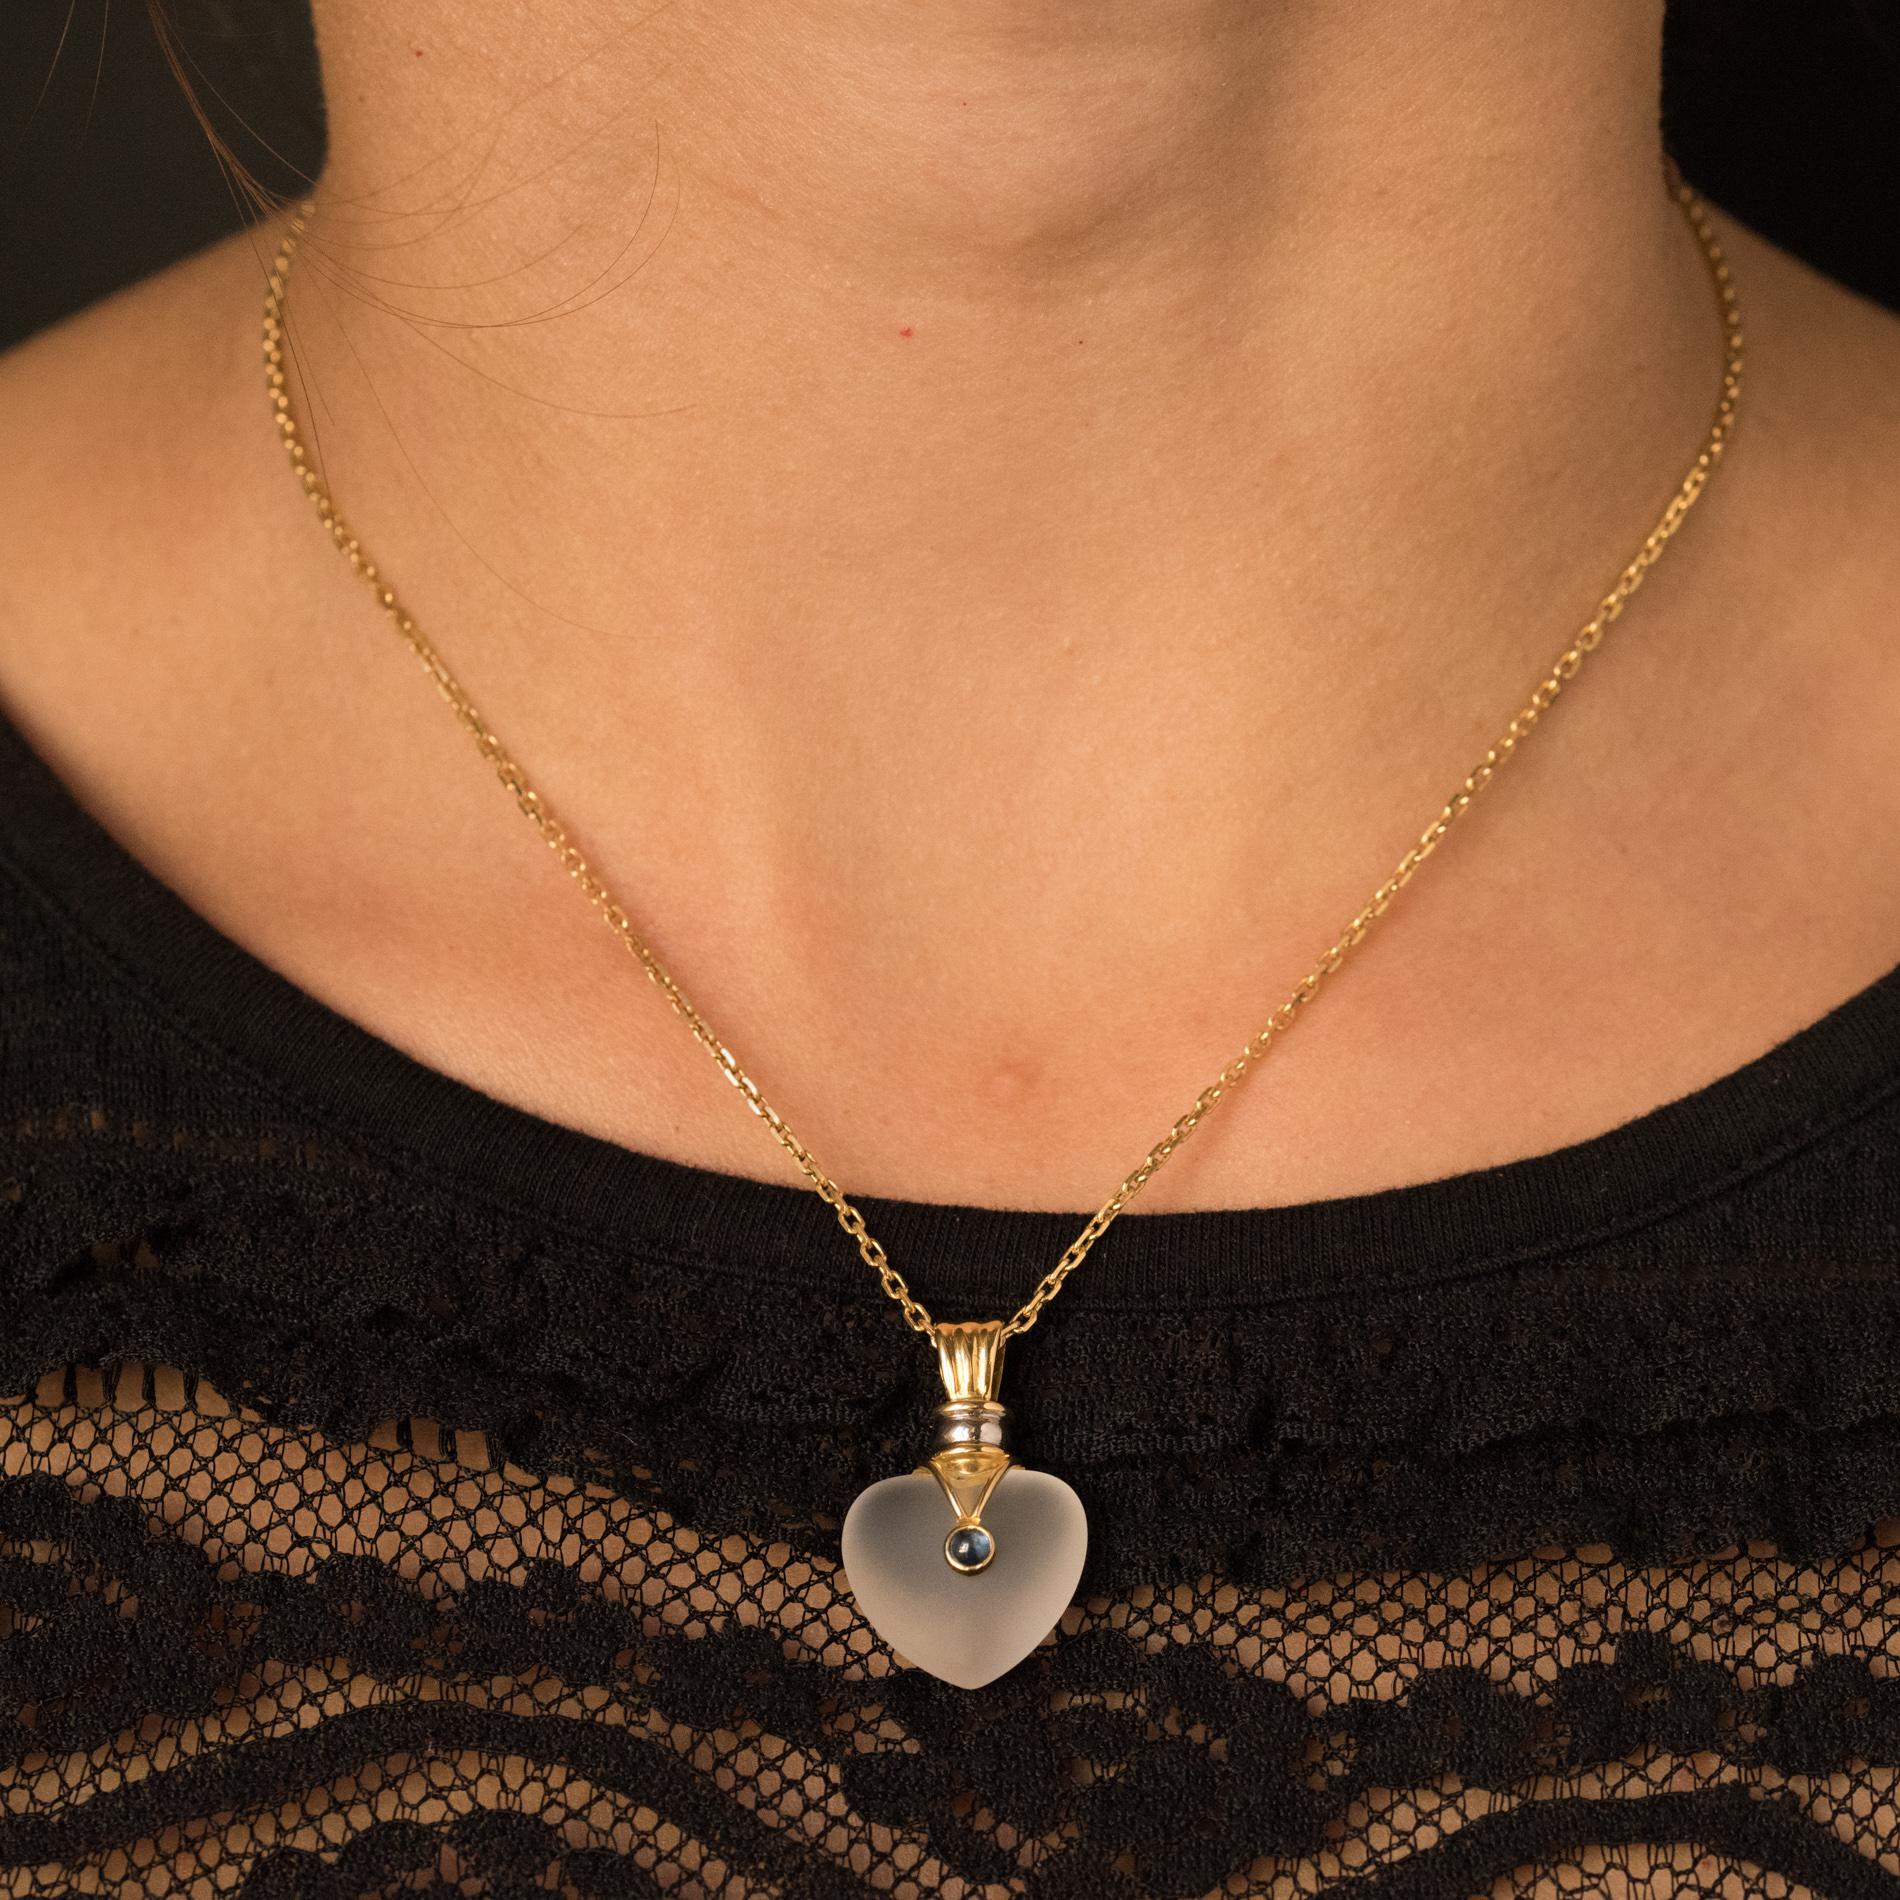 Pendant in 18 karats yellow gold, eagle's head hallmark.
It consists of a crystal heart set in the center of a cabochon blue stone. The bail is in 2 colors of gold, white and yellow. The chain bas a spring ring.
Dimensions of the pendant: Height: